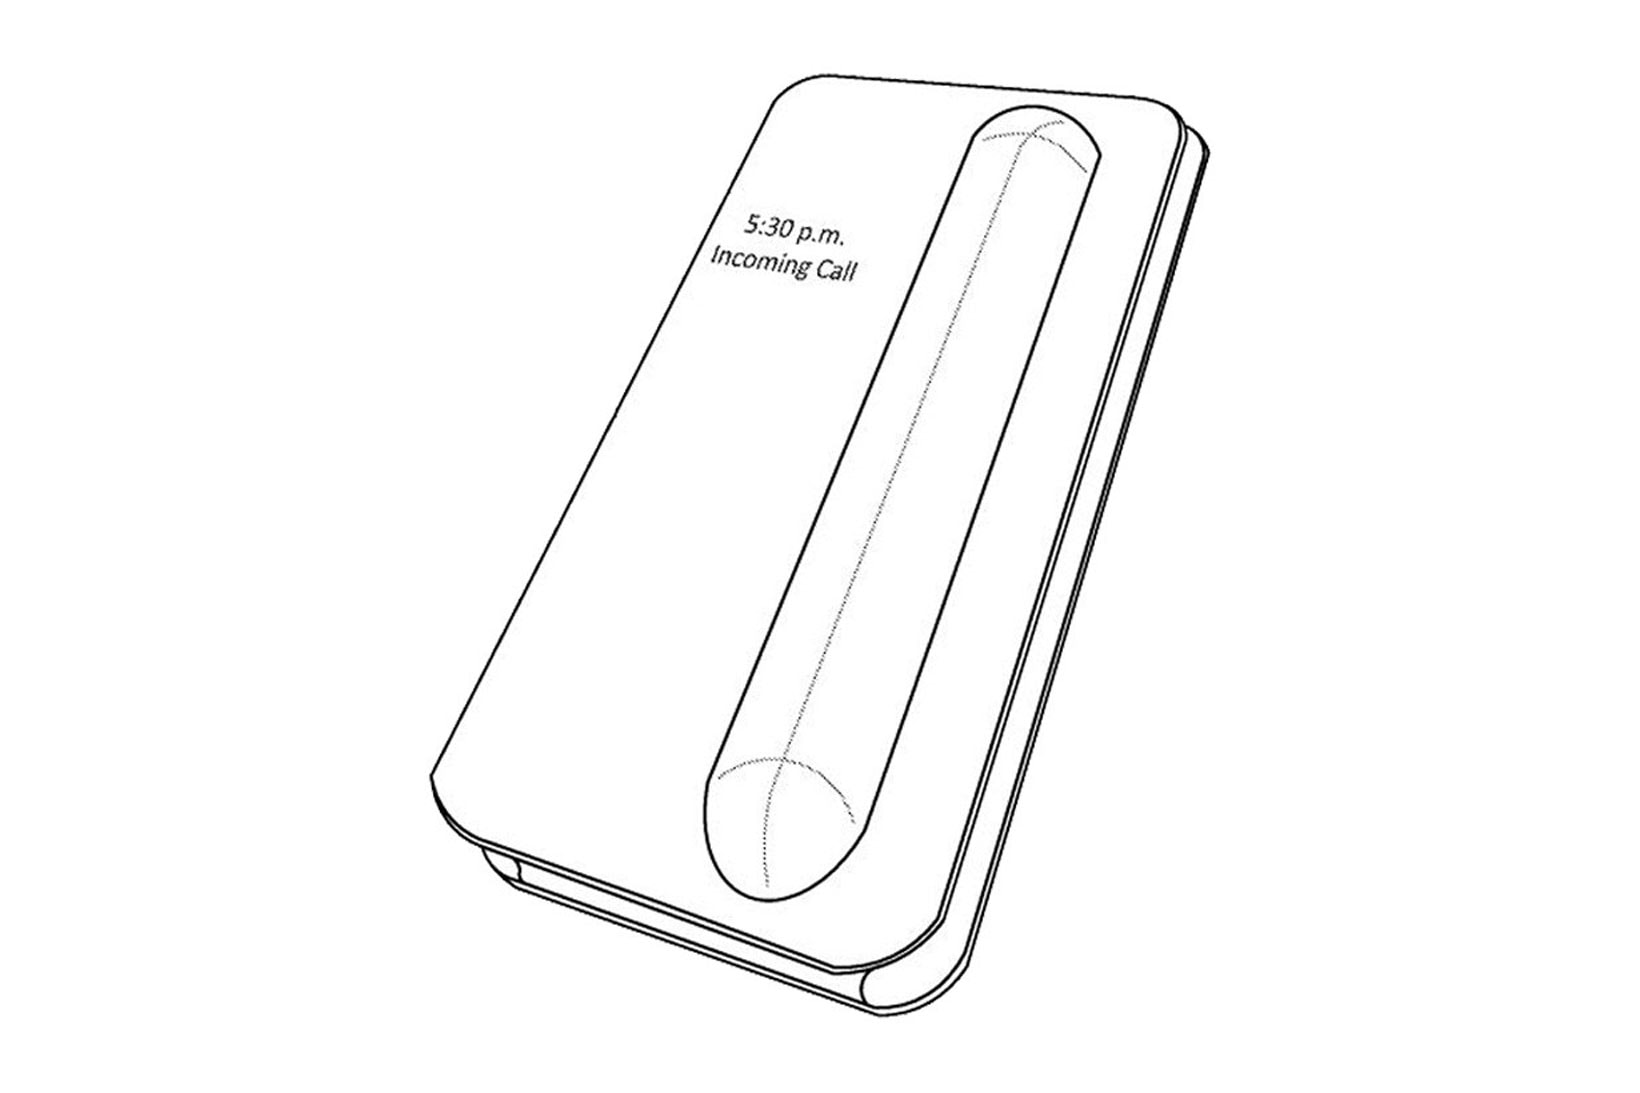 apple iphone case airpods charging built-in integrated design mock-up illustration drawing folding style closed external display